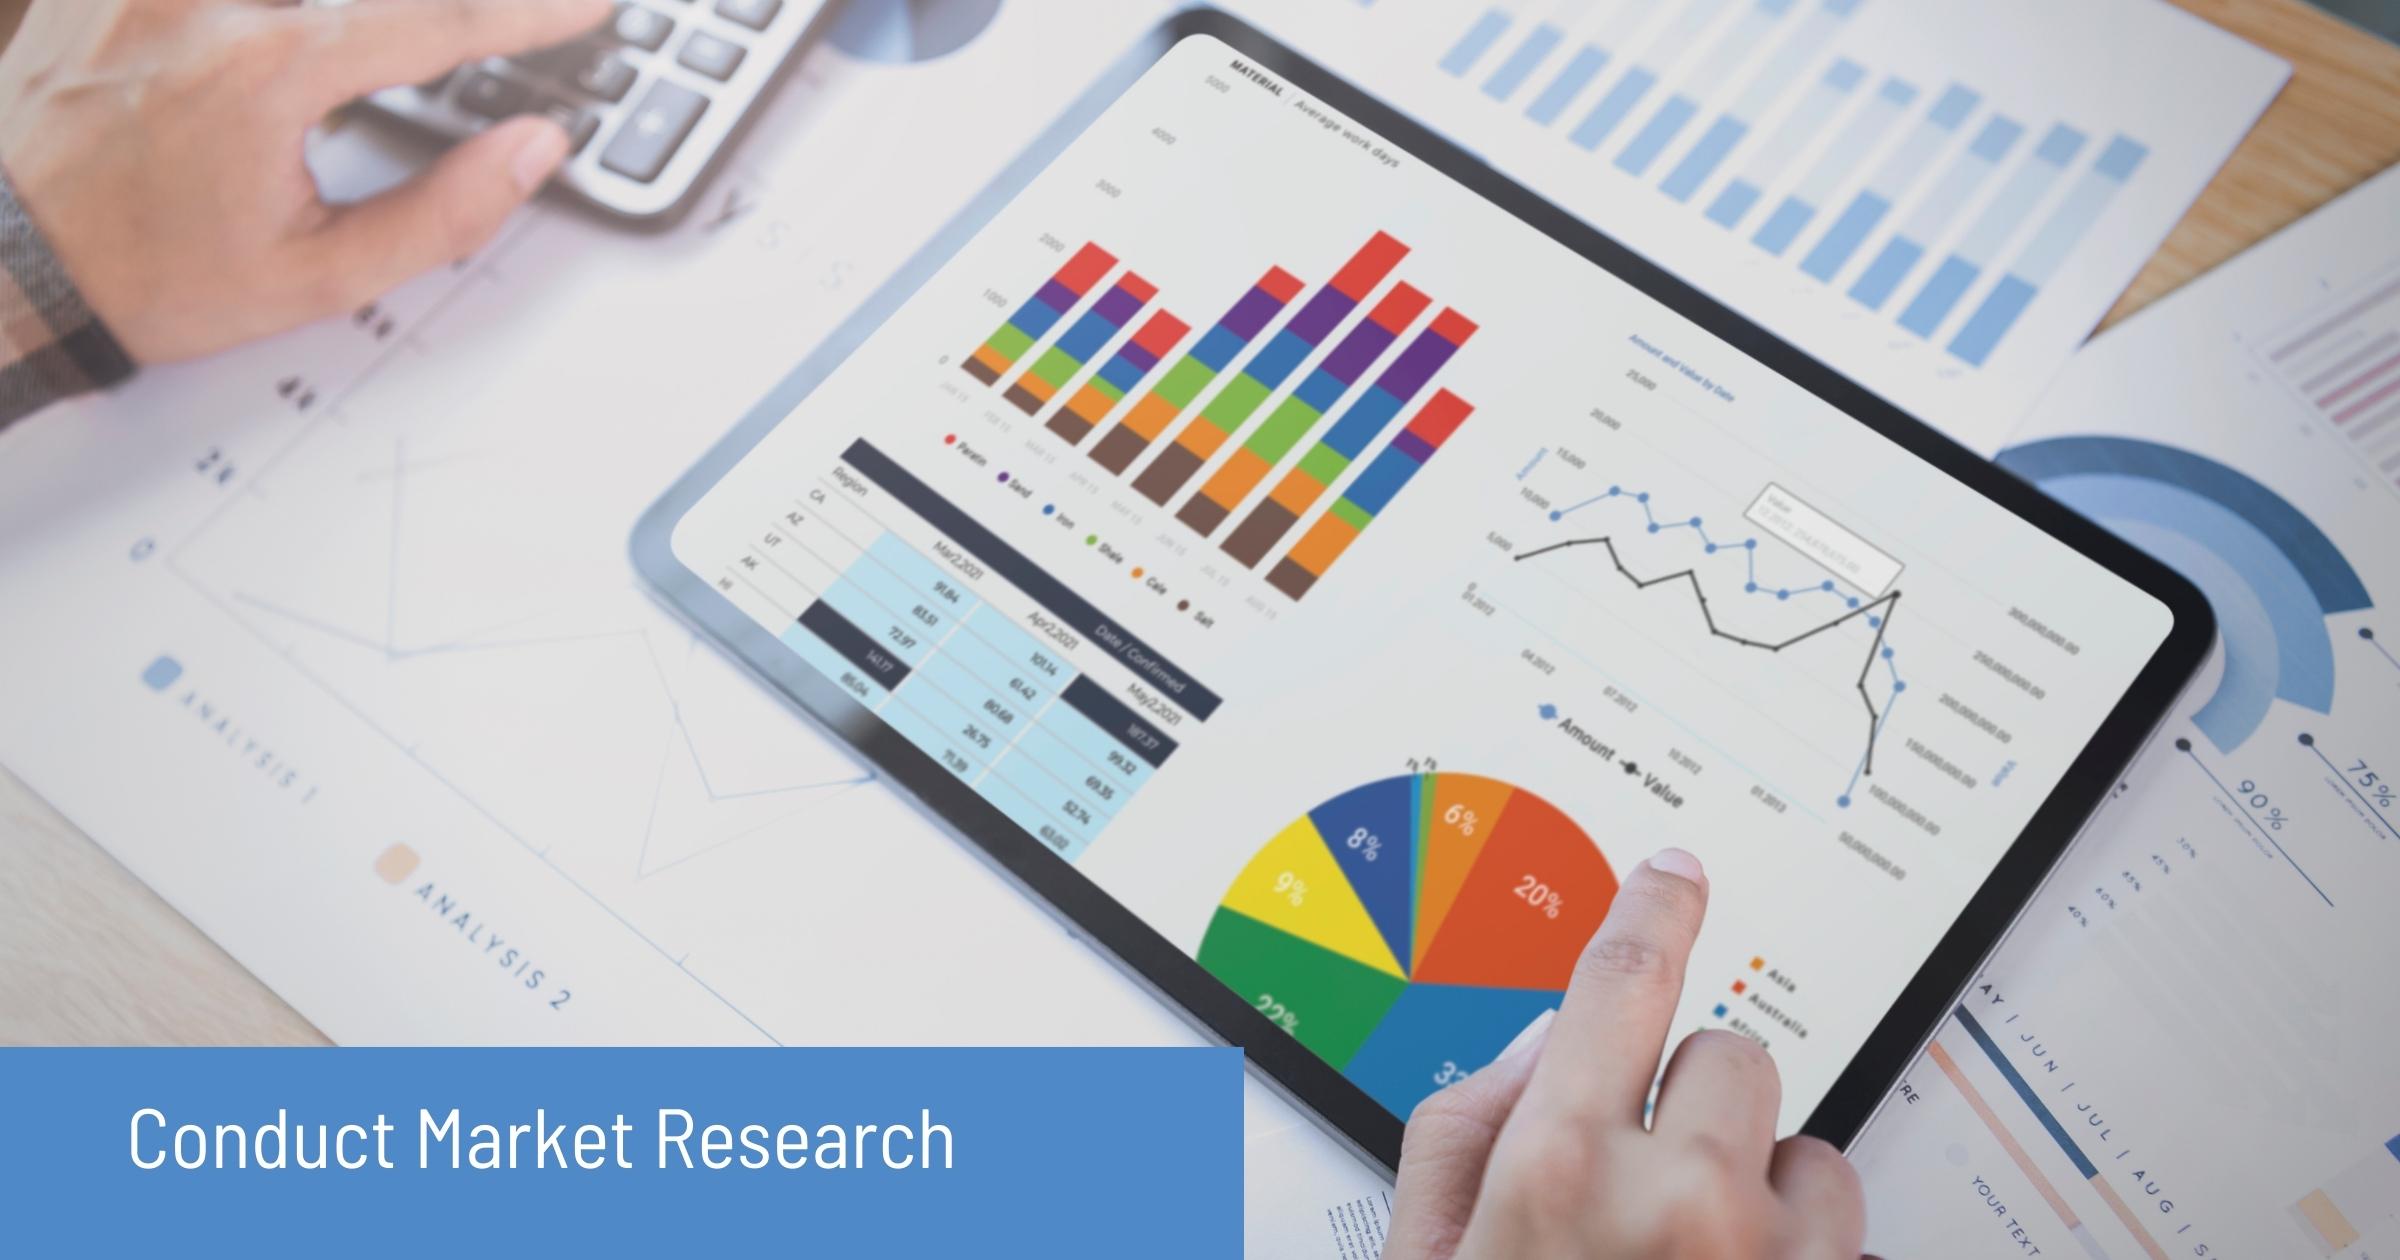 Why Conduct Market Research?